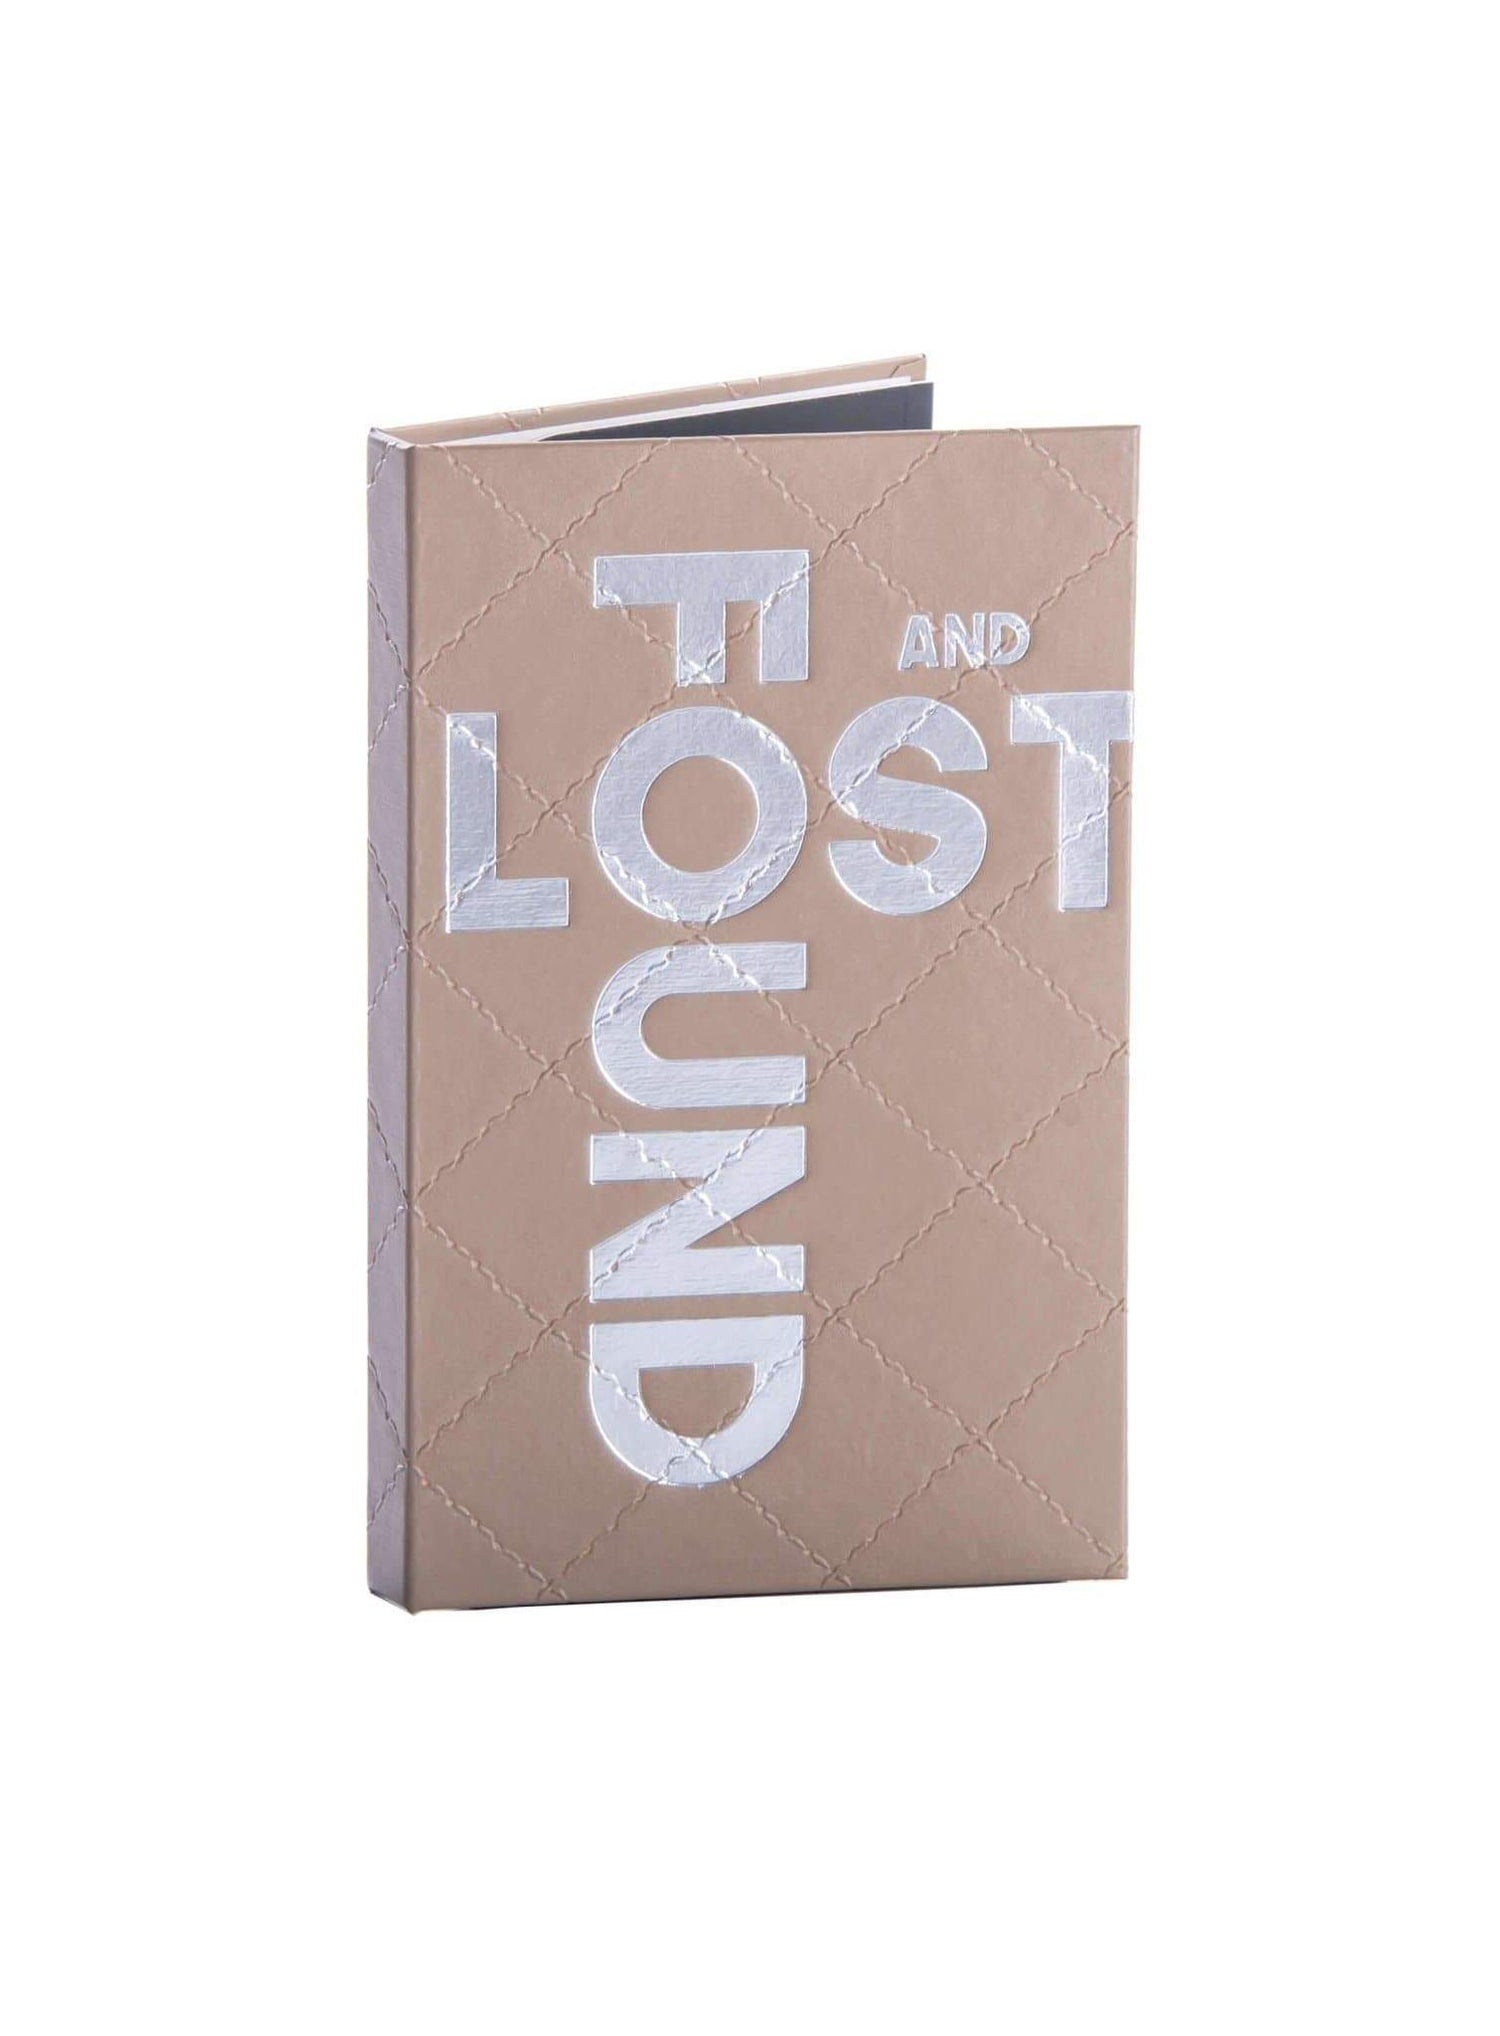 Kotelo - lost and found - LuKLabel